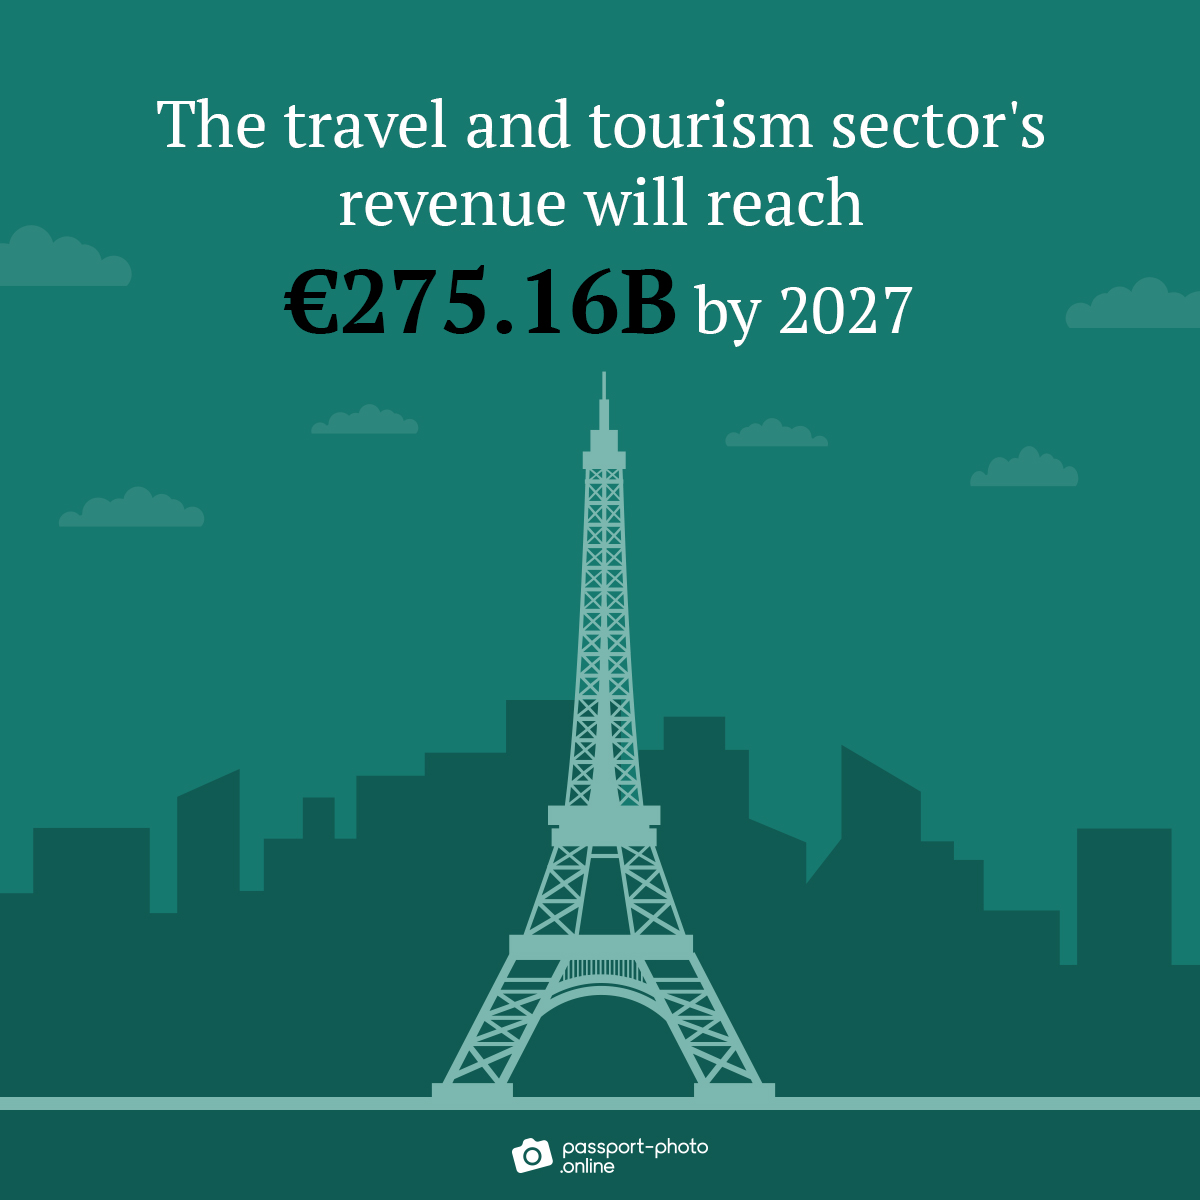 Projected growth of travel and tourism revenue from 2023–2027 reaching €275.16B